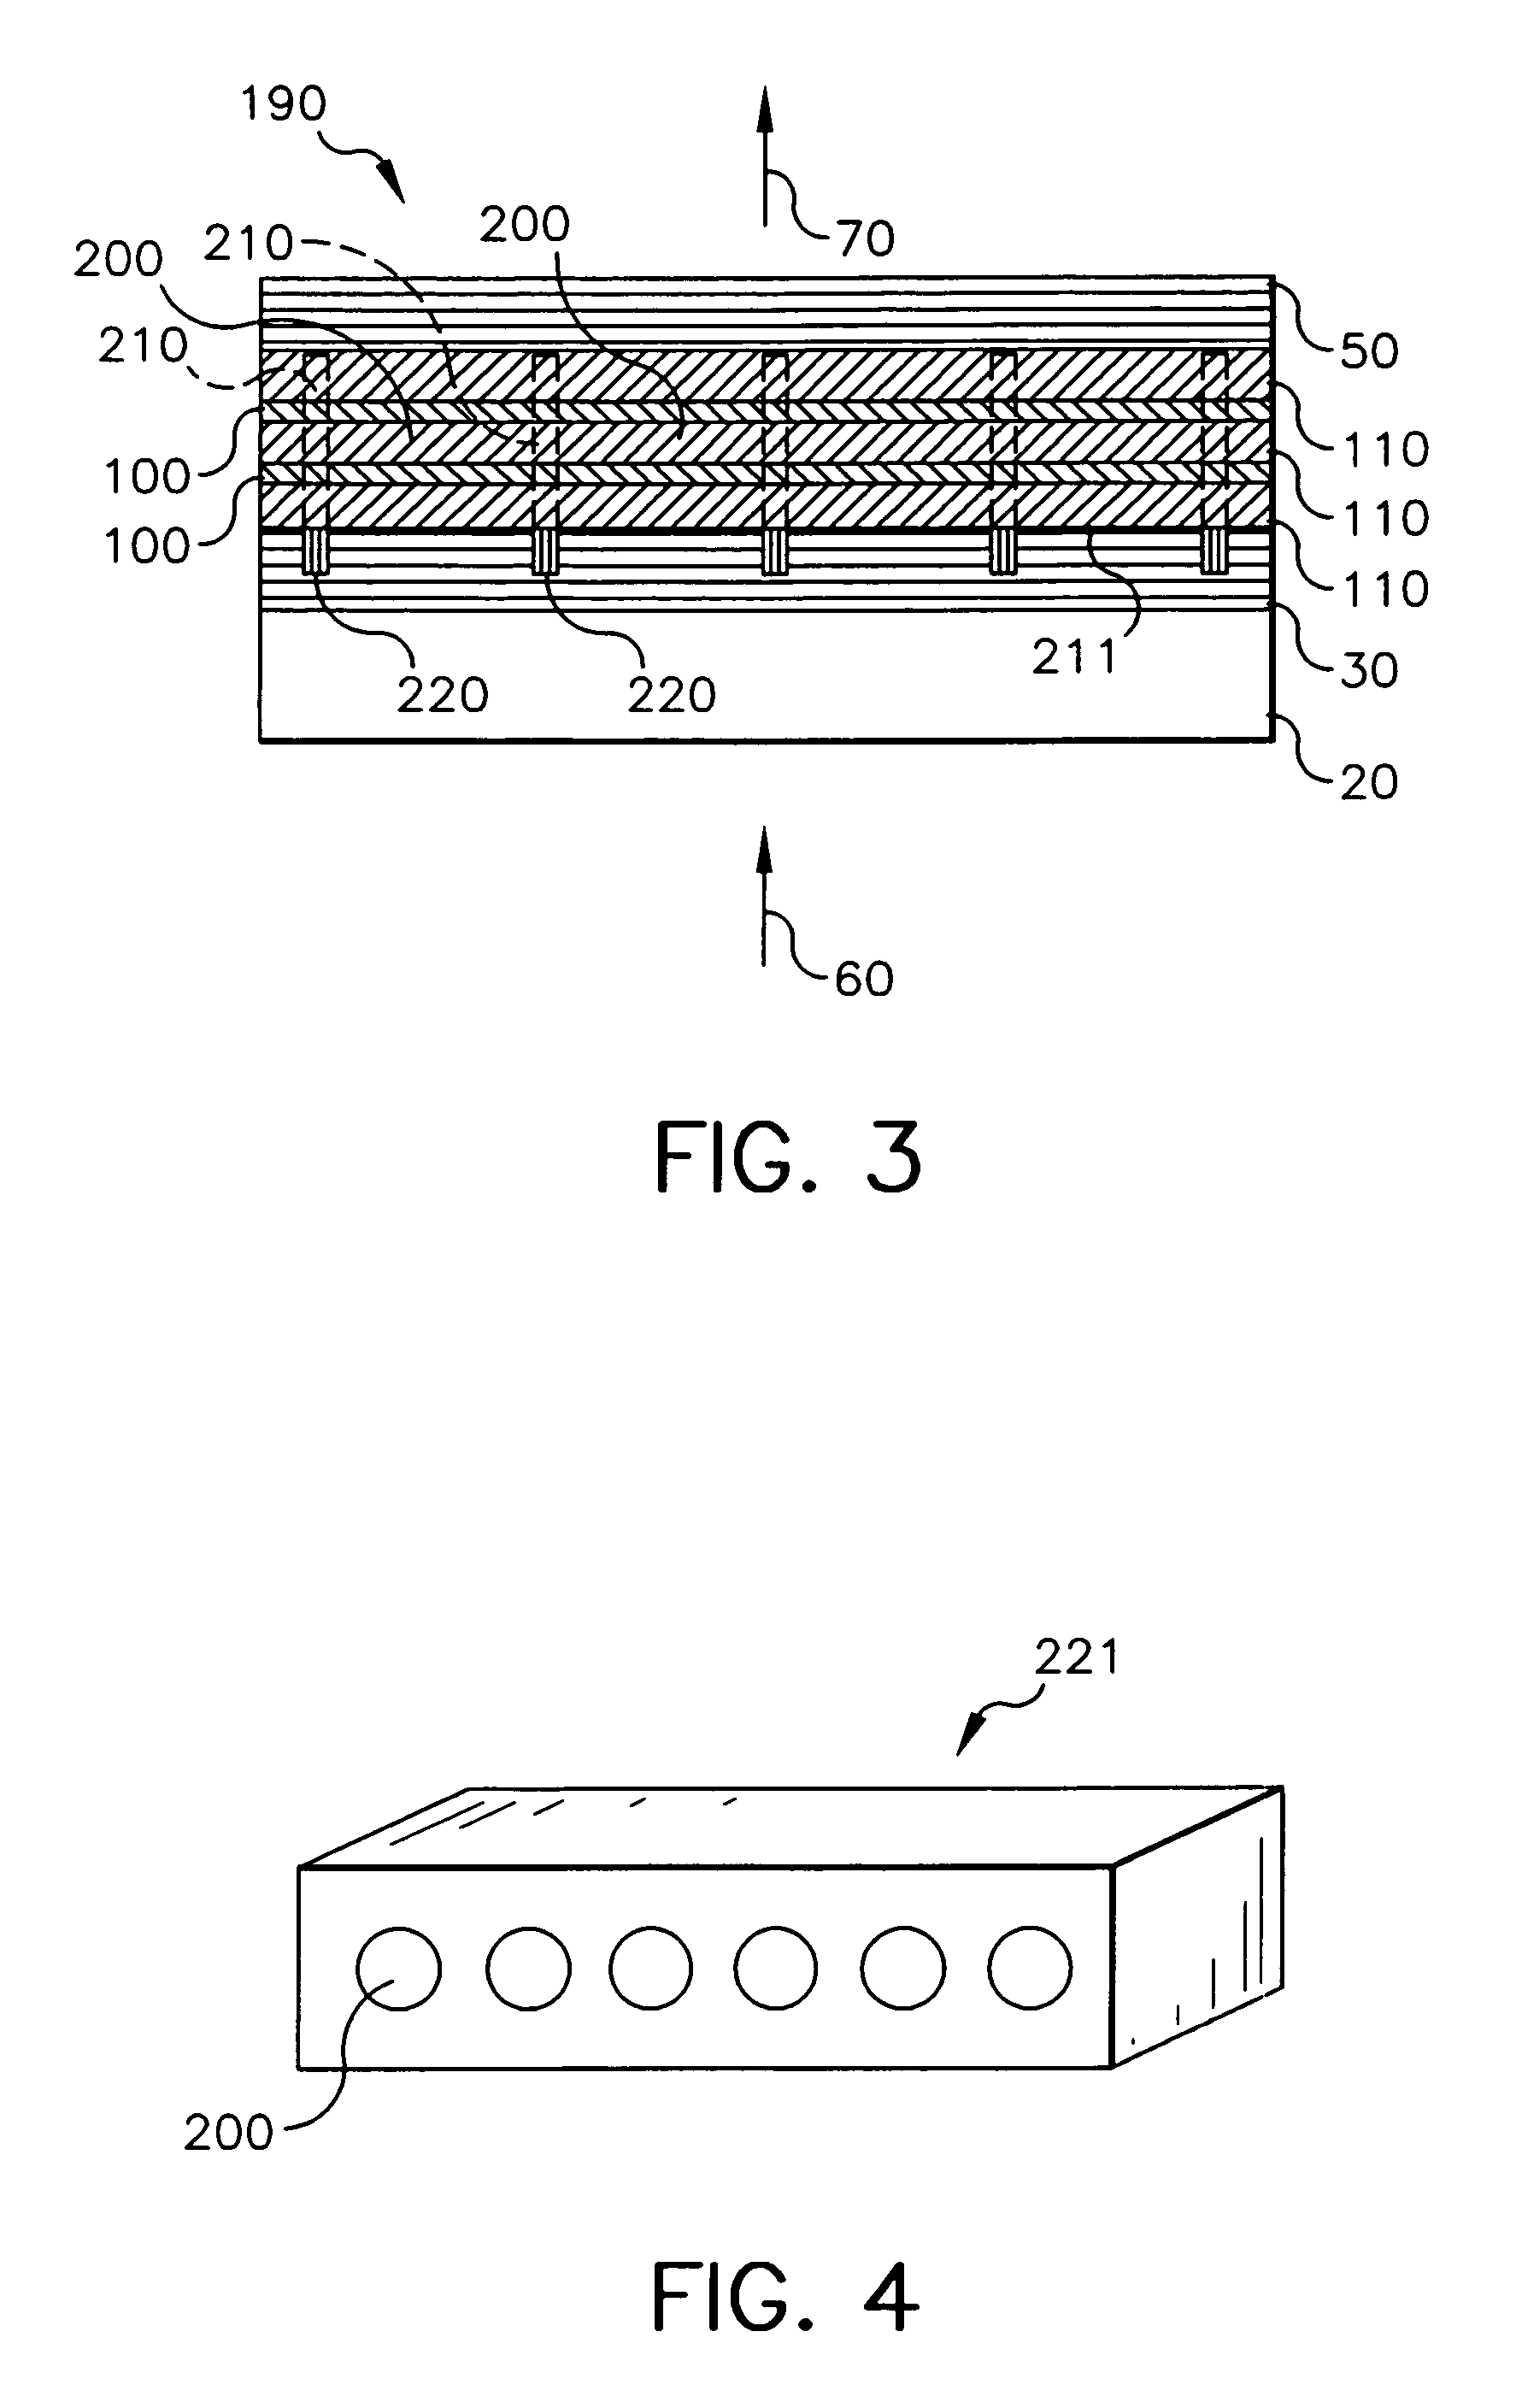 Parallel access data storage system using a combination of VCSEL arrays and an integrated solid immersion lens array